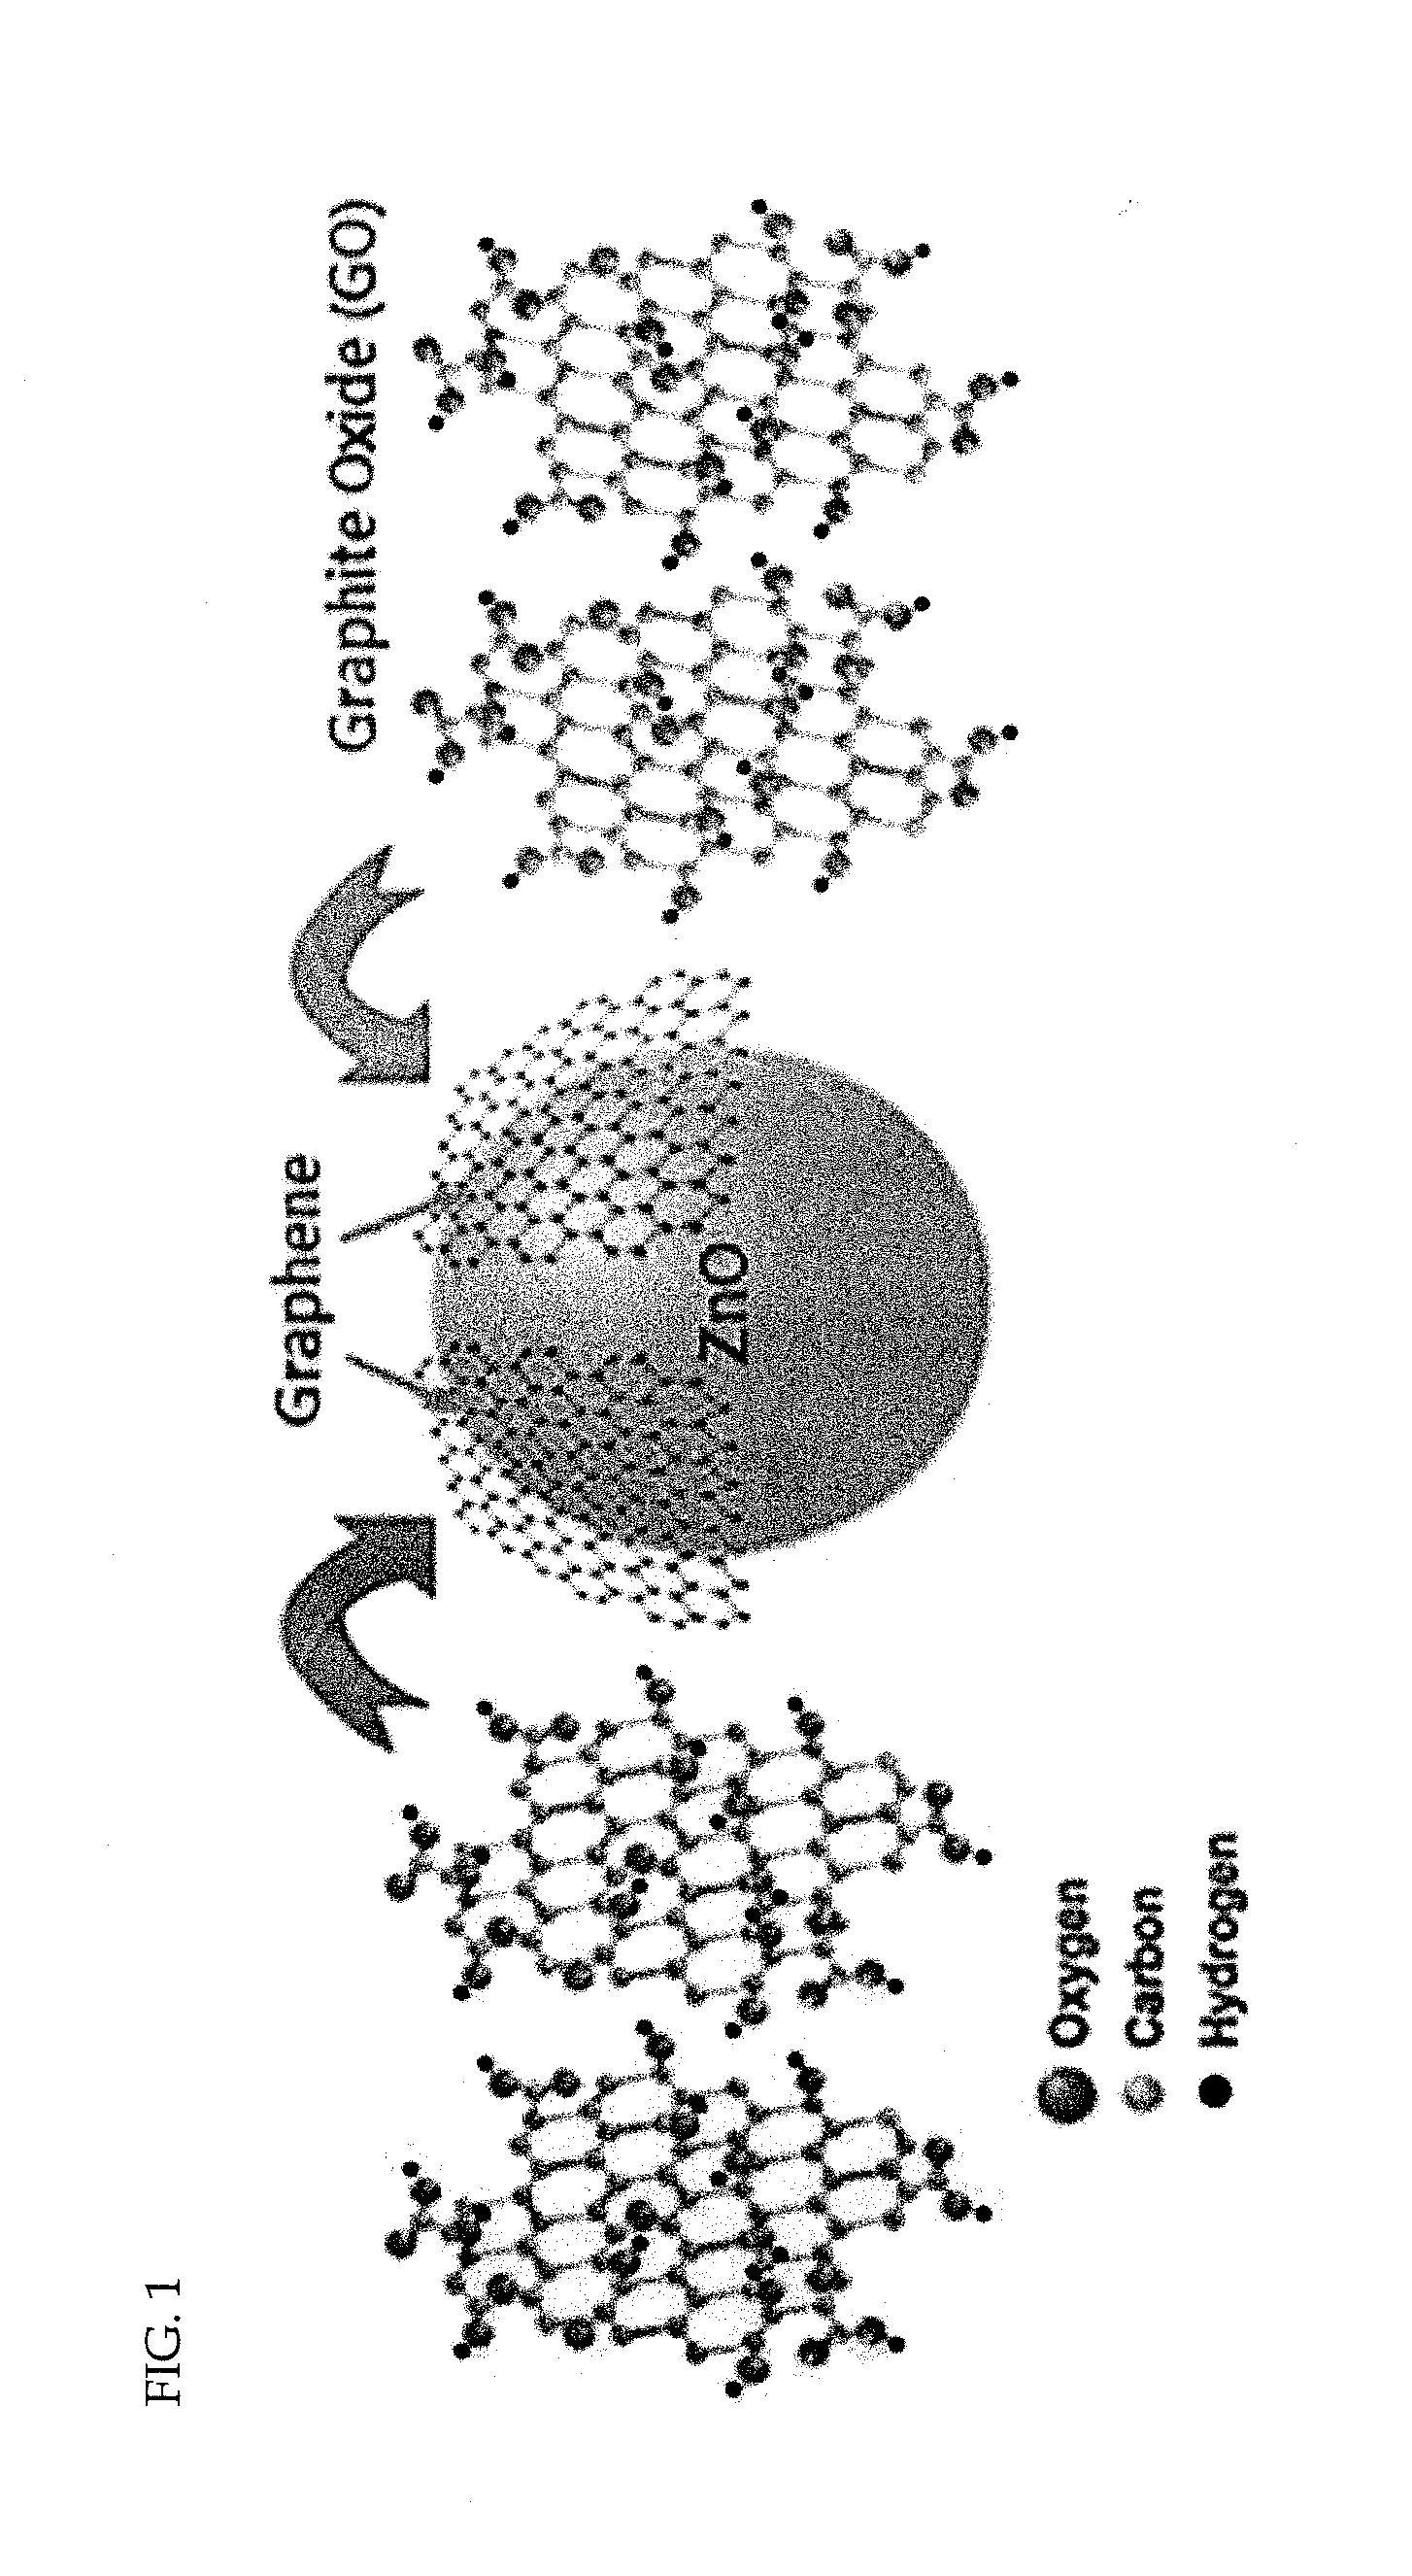 Method for producing graphene by chemical exfoliation